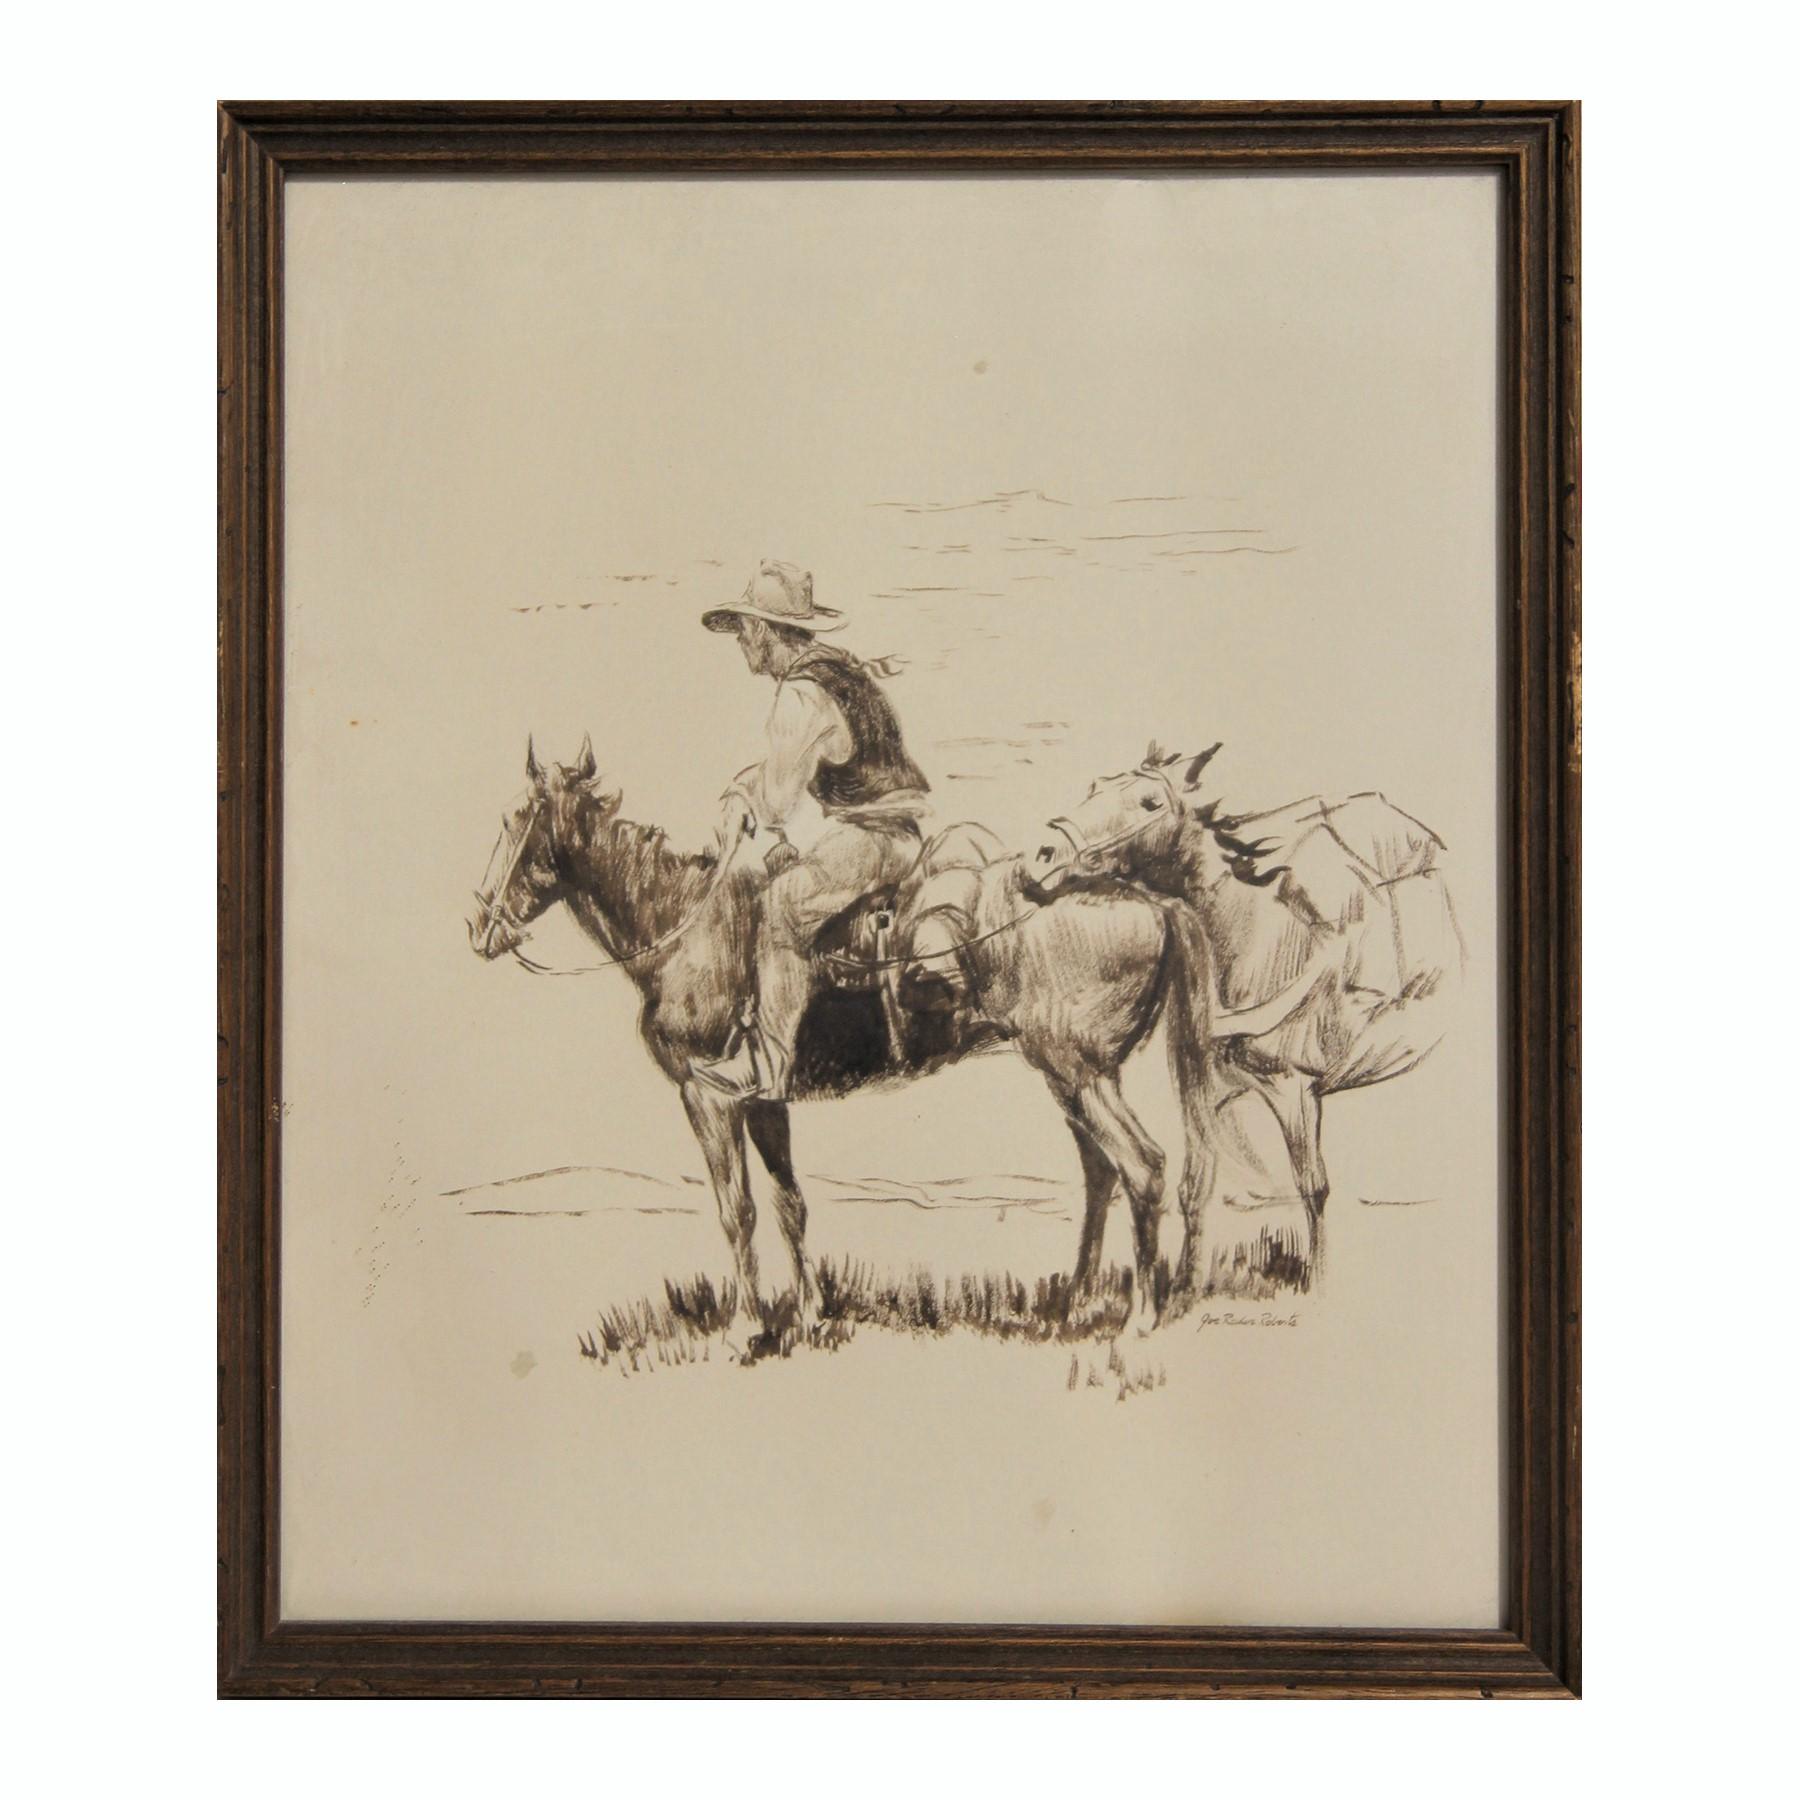 Joe Radar Roberts  Animal Art - Monochromatic Brown Toned Western Portrait Drawing of a Cowboy and Two Horses 